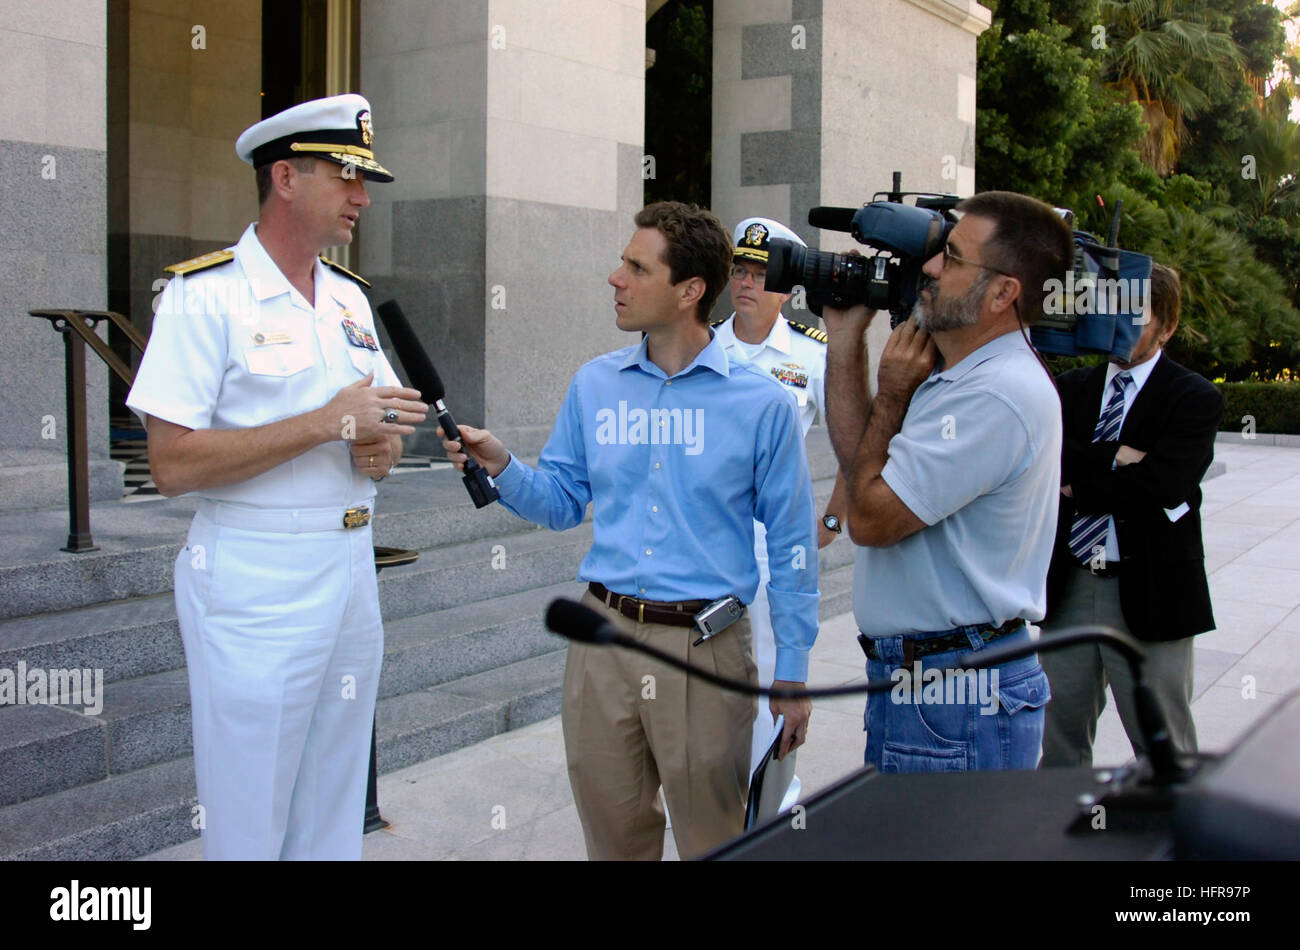 060823-N-6843I-124 Sacramento, Calif. (Aug. 23, 2006) - Commander, Navy Region Southwest Rear Adm. Len R. Hering Sr. speaks to reporters during a press conference for assembly bill (AB) 1965 at the California State Capitol building. AB 1965 is a proposal to help stop predatory lending practices such as charging service members high interest rates on short-term loans. A survey by the Defense Manpower Data Center showed that 13 percent of Sailors have used predatory loans in the last 12 months, where interest rates can exceed 1,000 percent and cost military members and their families more than $ Stock Photo